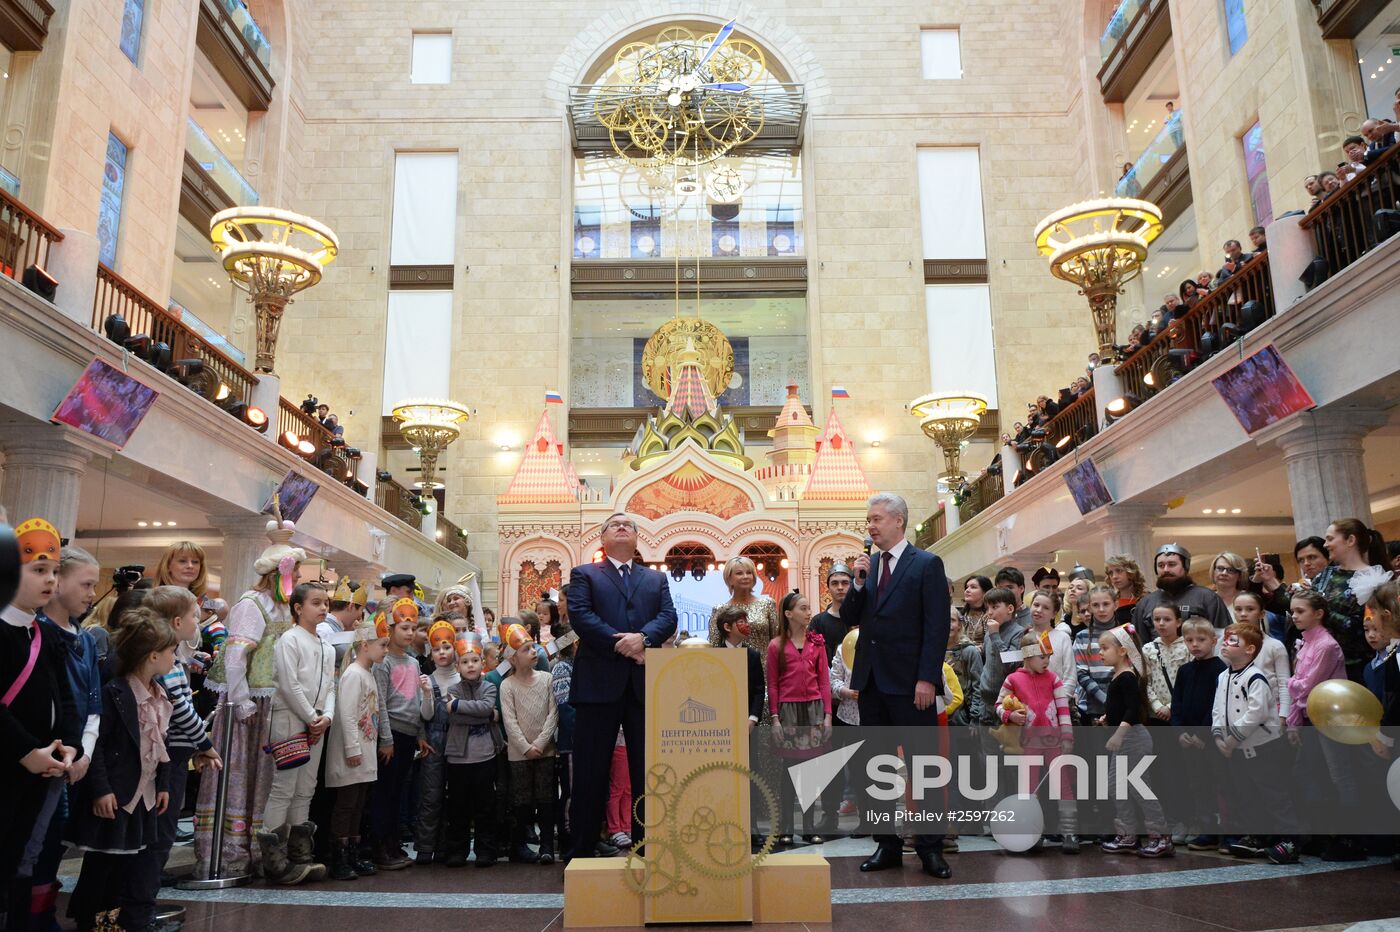 Central Children's Store on Lubyanka opens in Moscow